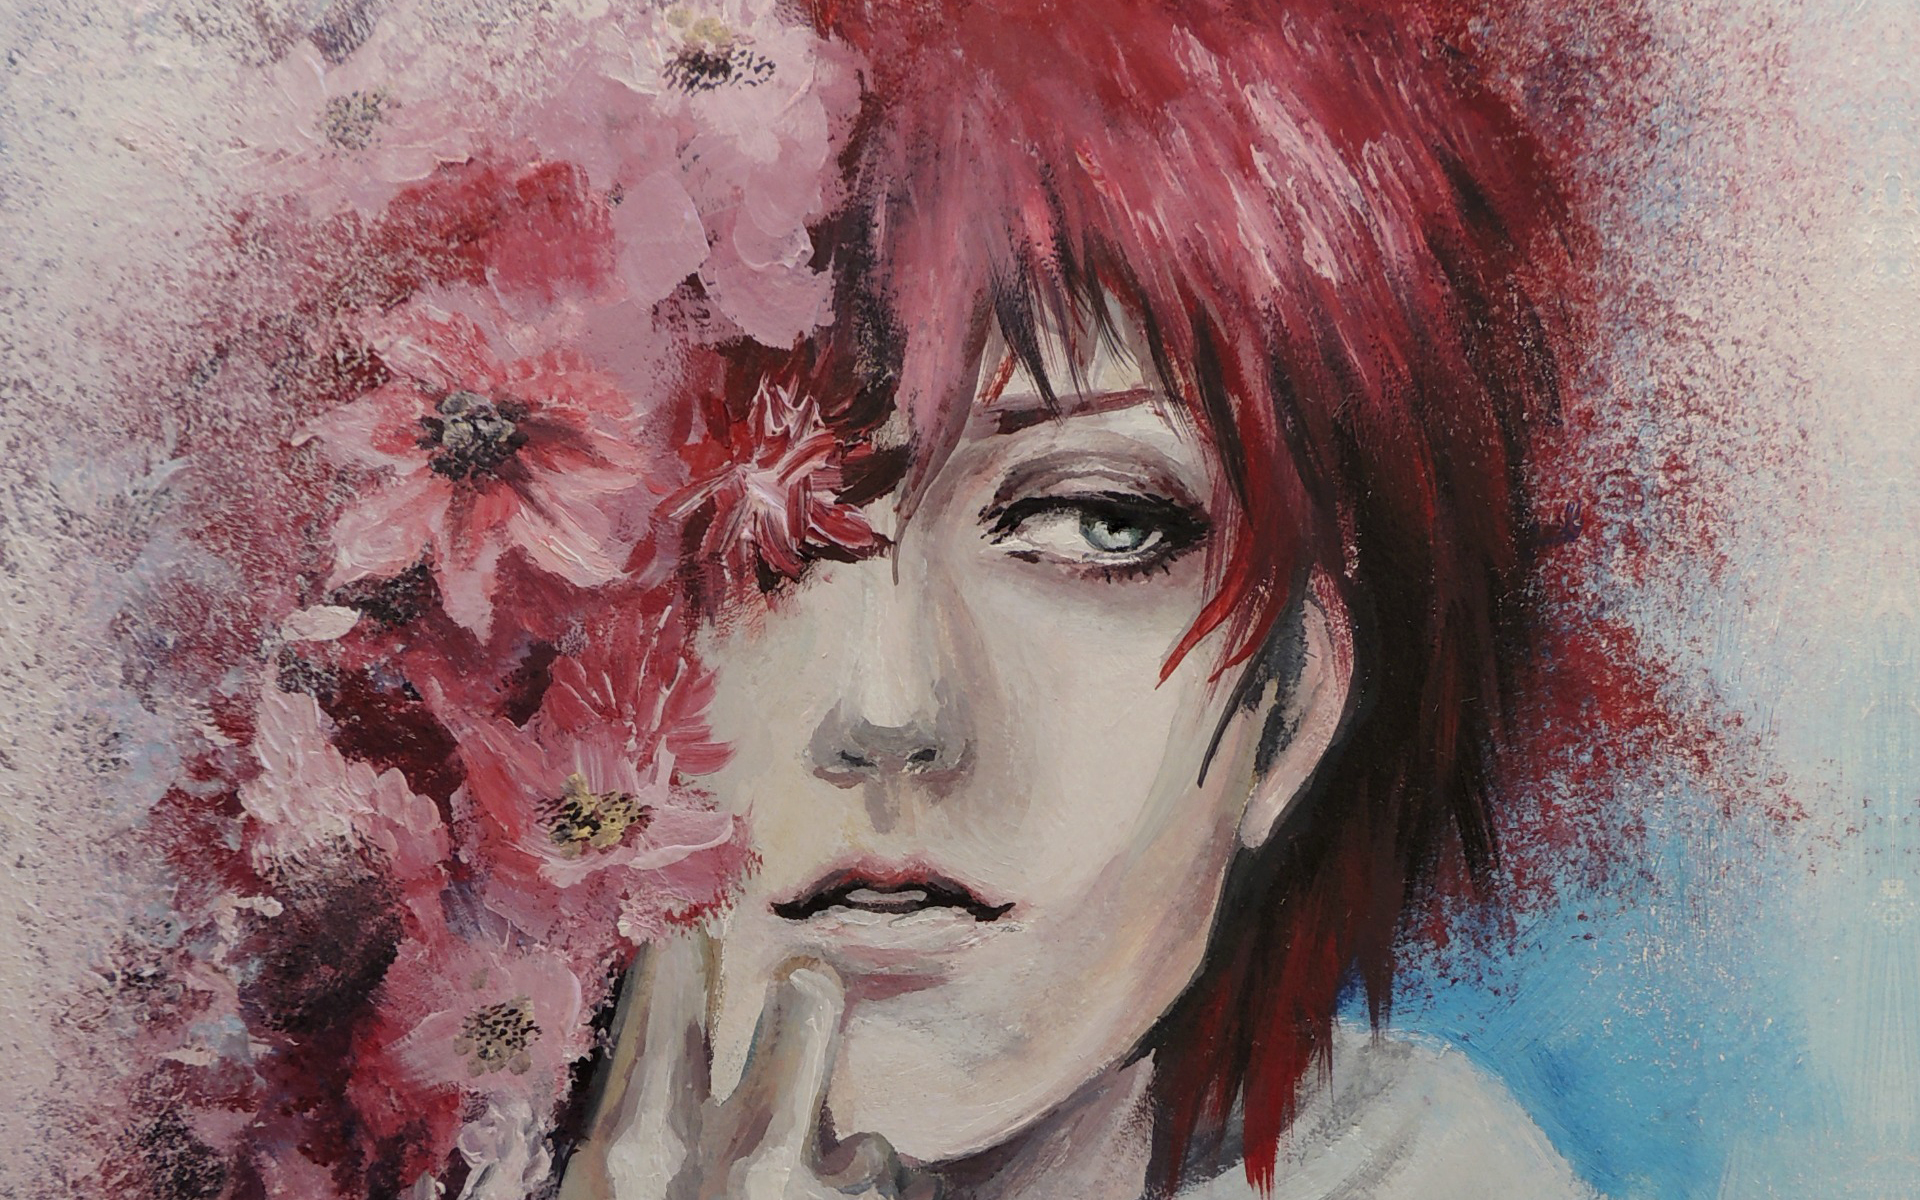 1920x1200 Manual resize of wallpaper flowers, squirt, portrait, art, naruto, guy, painting, Naruto, Akatsuki, sasori, Sasori, lanaviva, No time for maybe the most, Scorpion of the red Sands